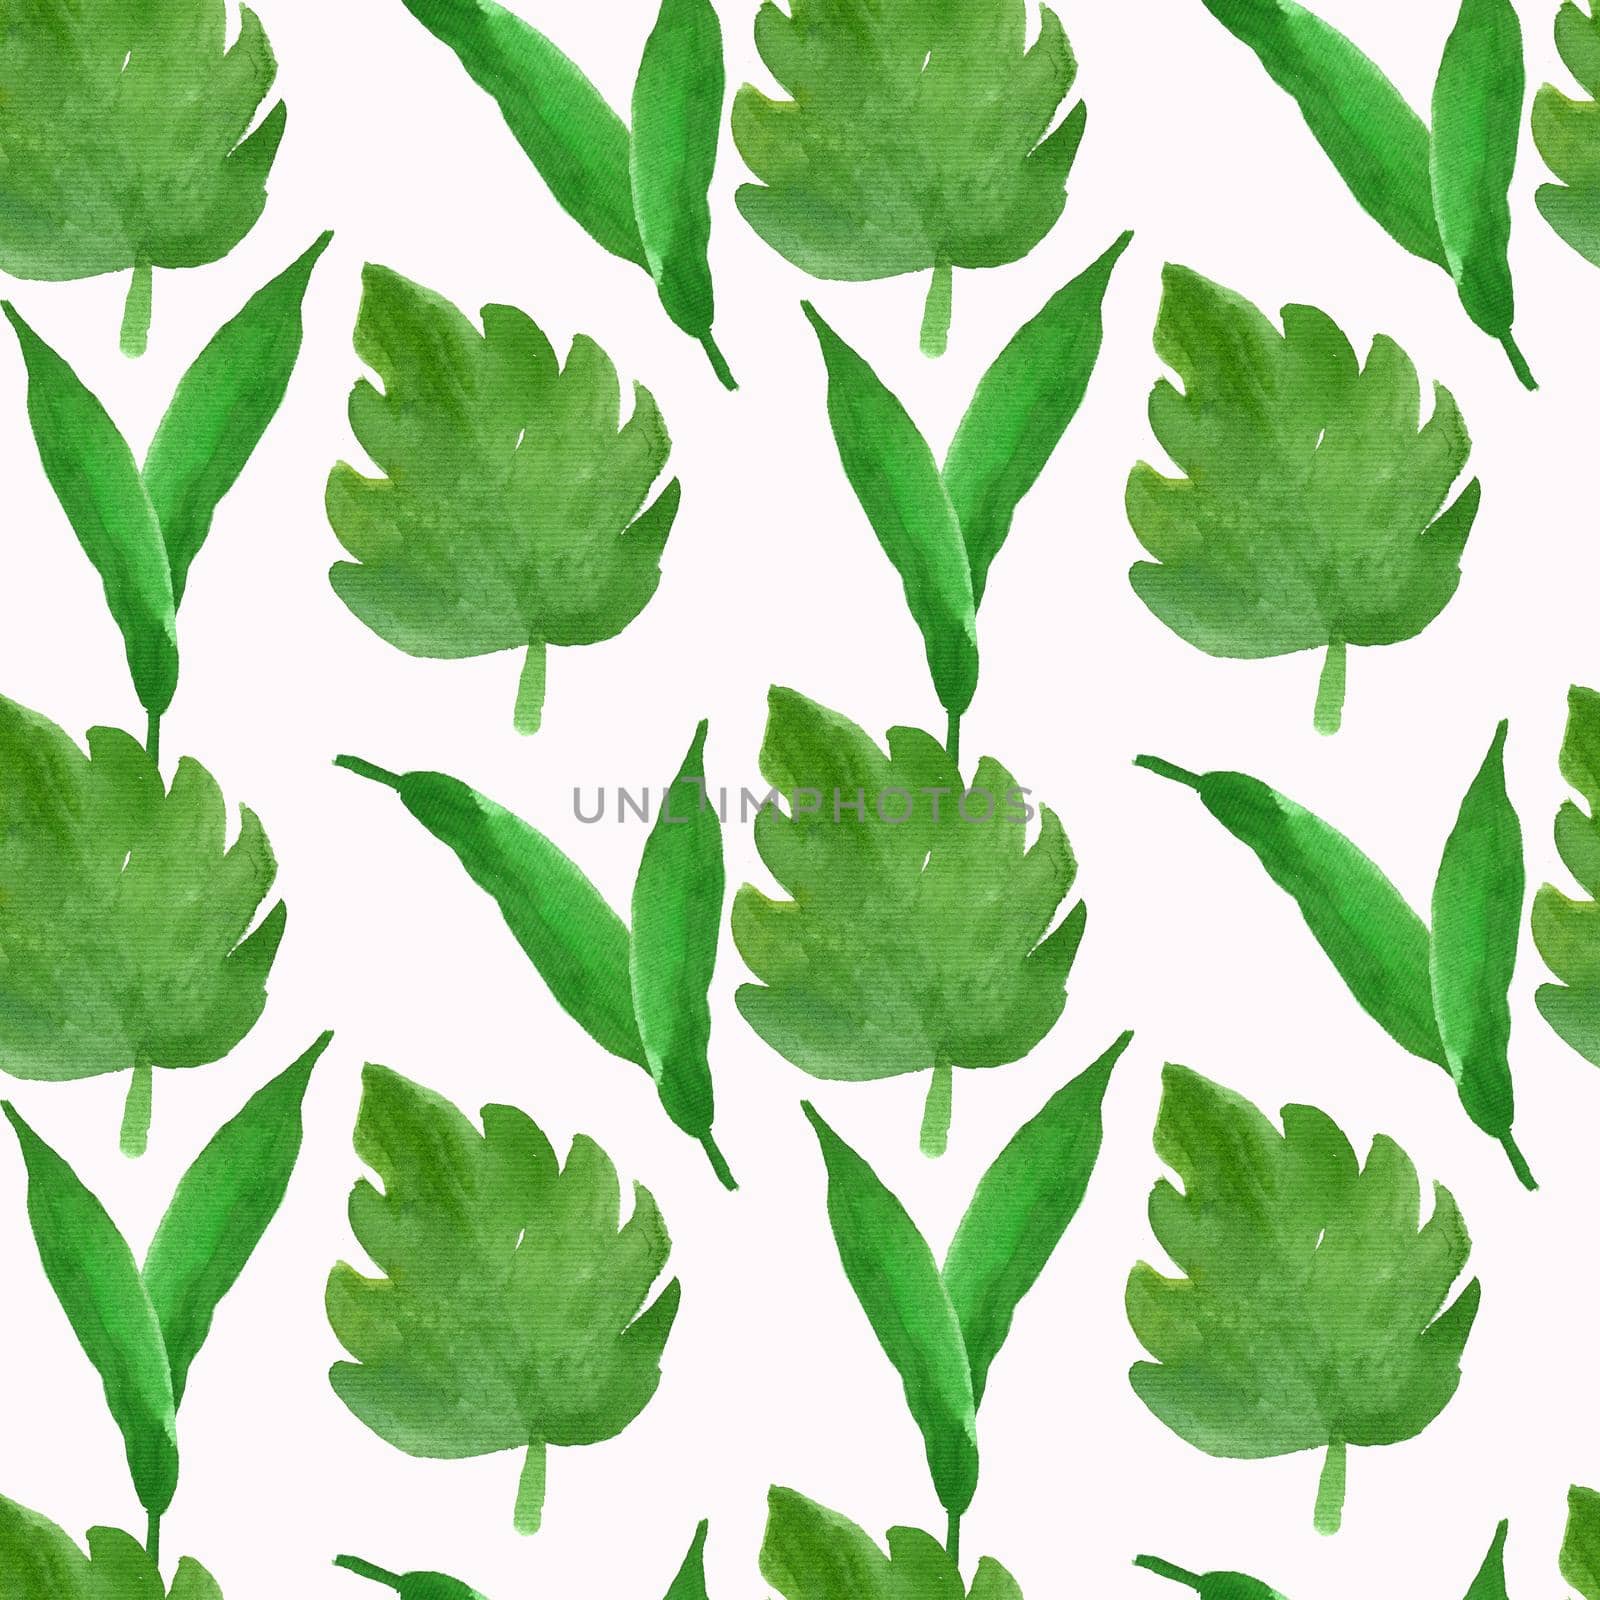 Seamless watercolor pattern of green leaves of monstera. Isolated image on a white one. Large carved leaves of tropical plants of Africa.